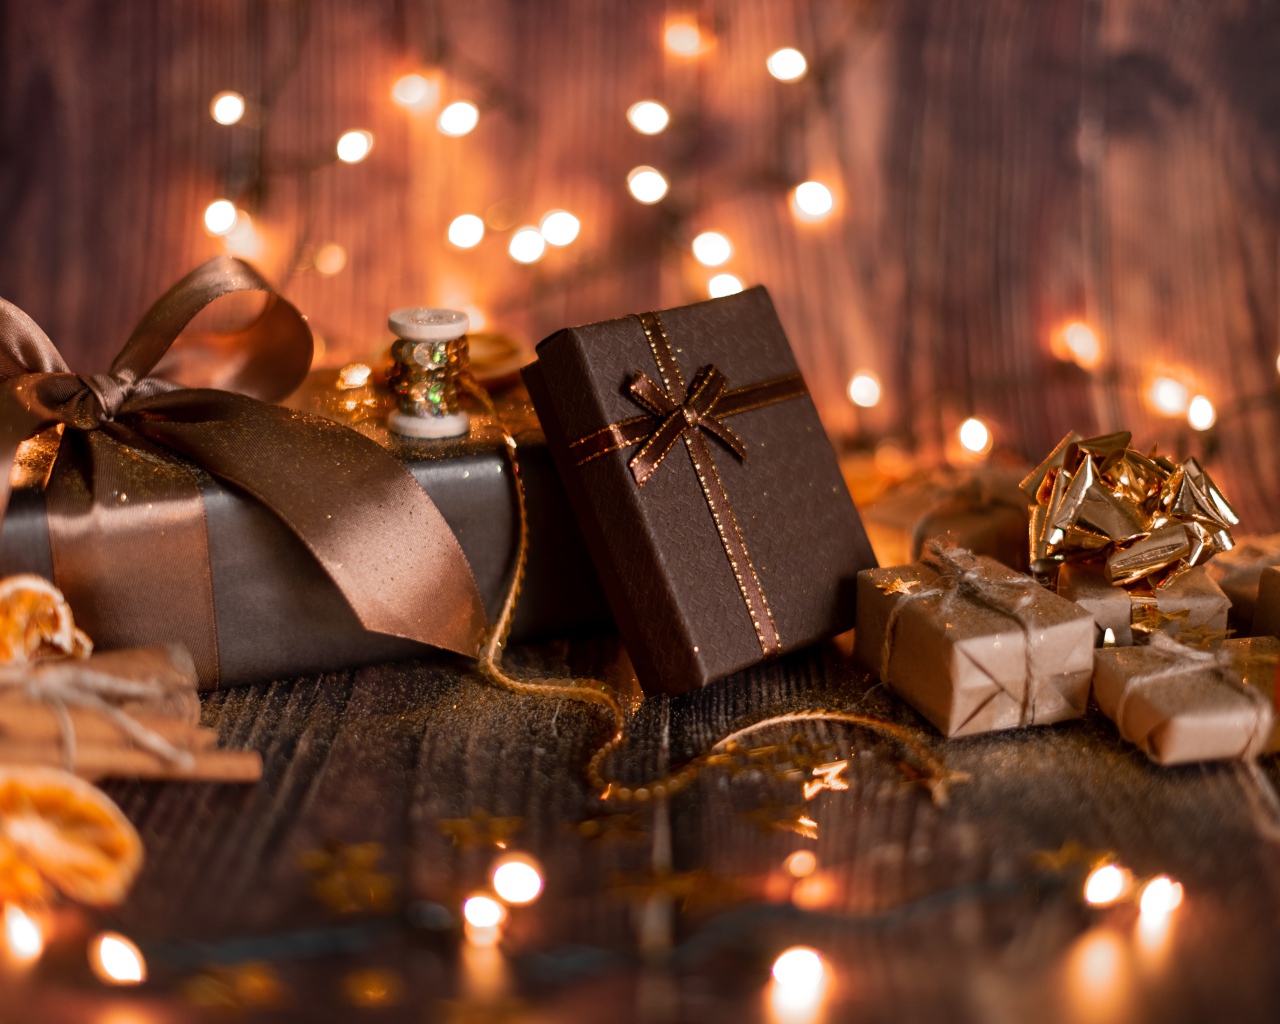 A lot of gifts on a wooden background with a garland